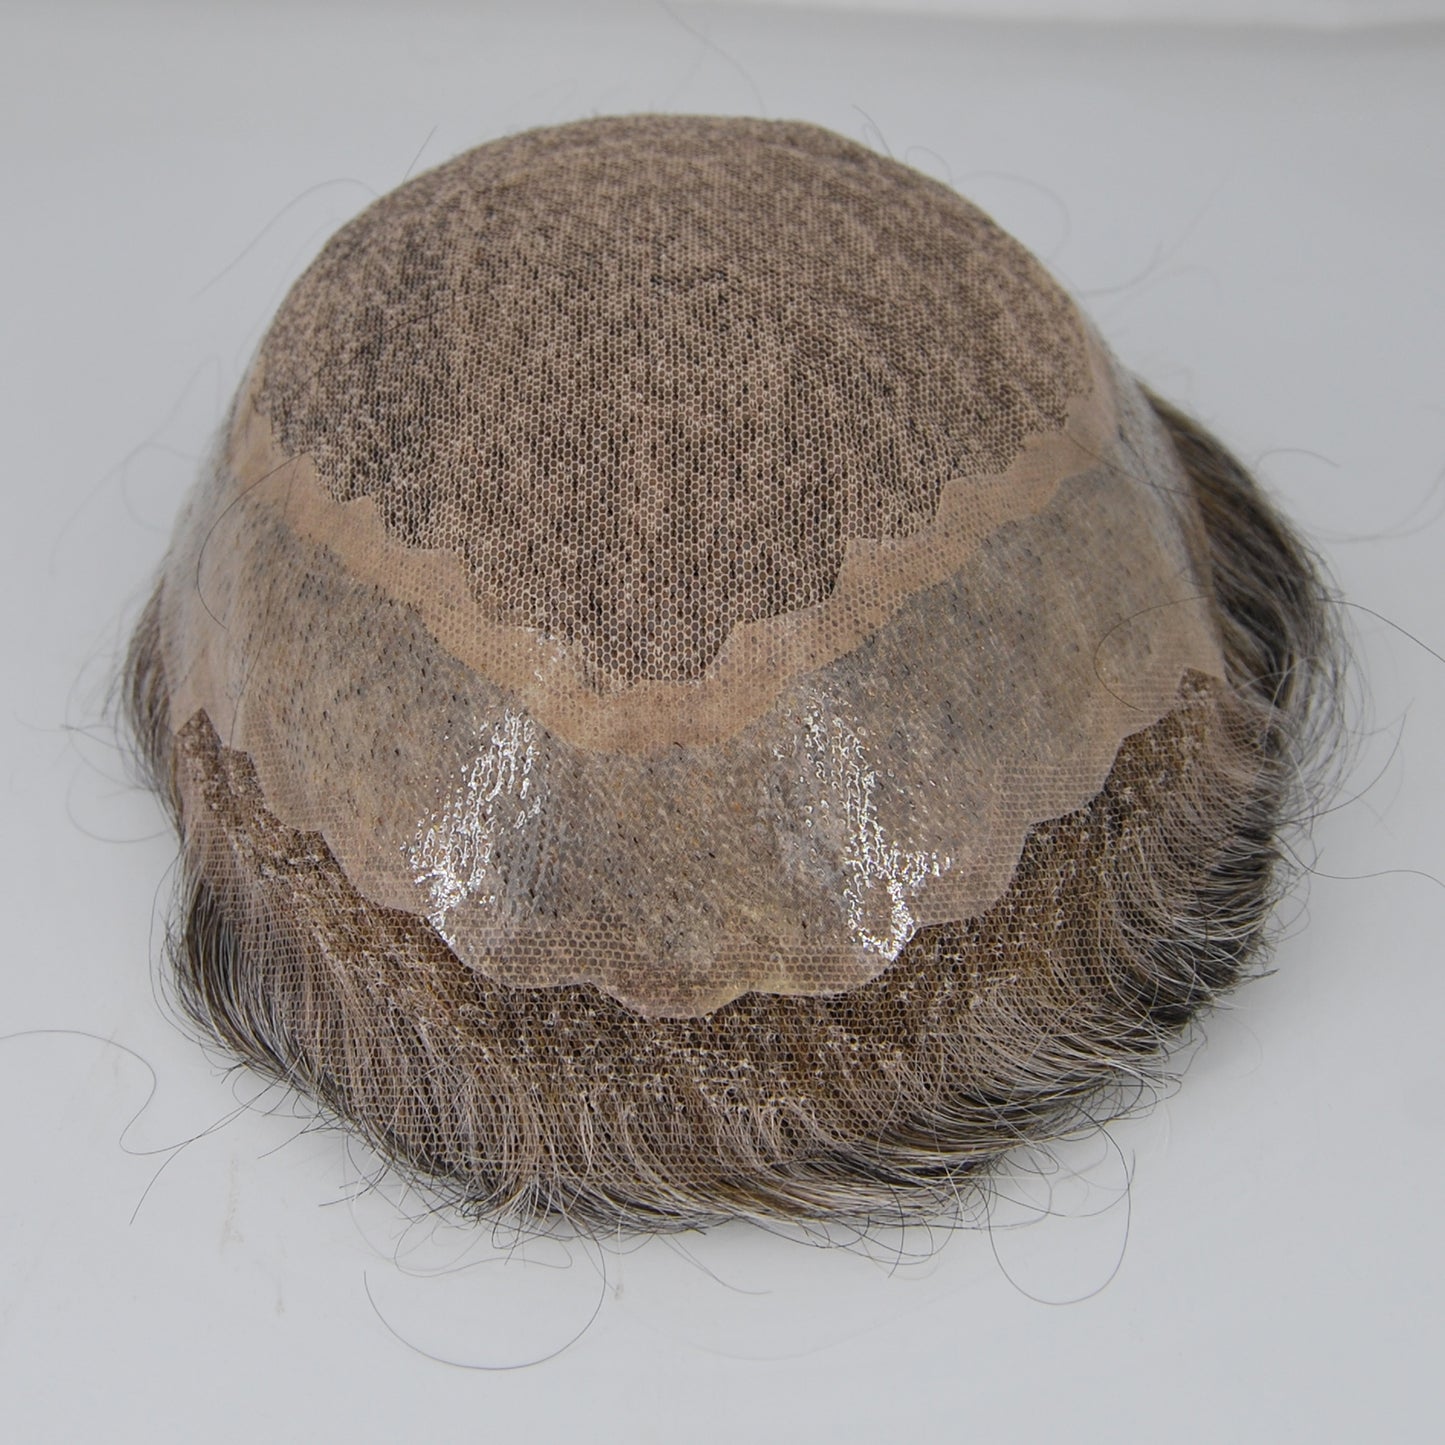 Clearance toupee silk base with PU around hair system #1 jet black mixed 50% grey hair system